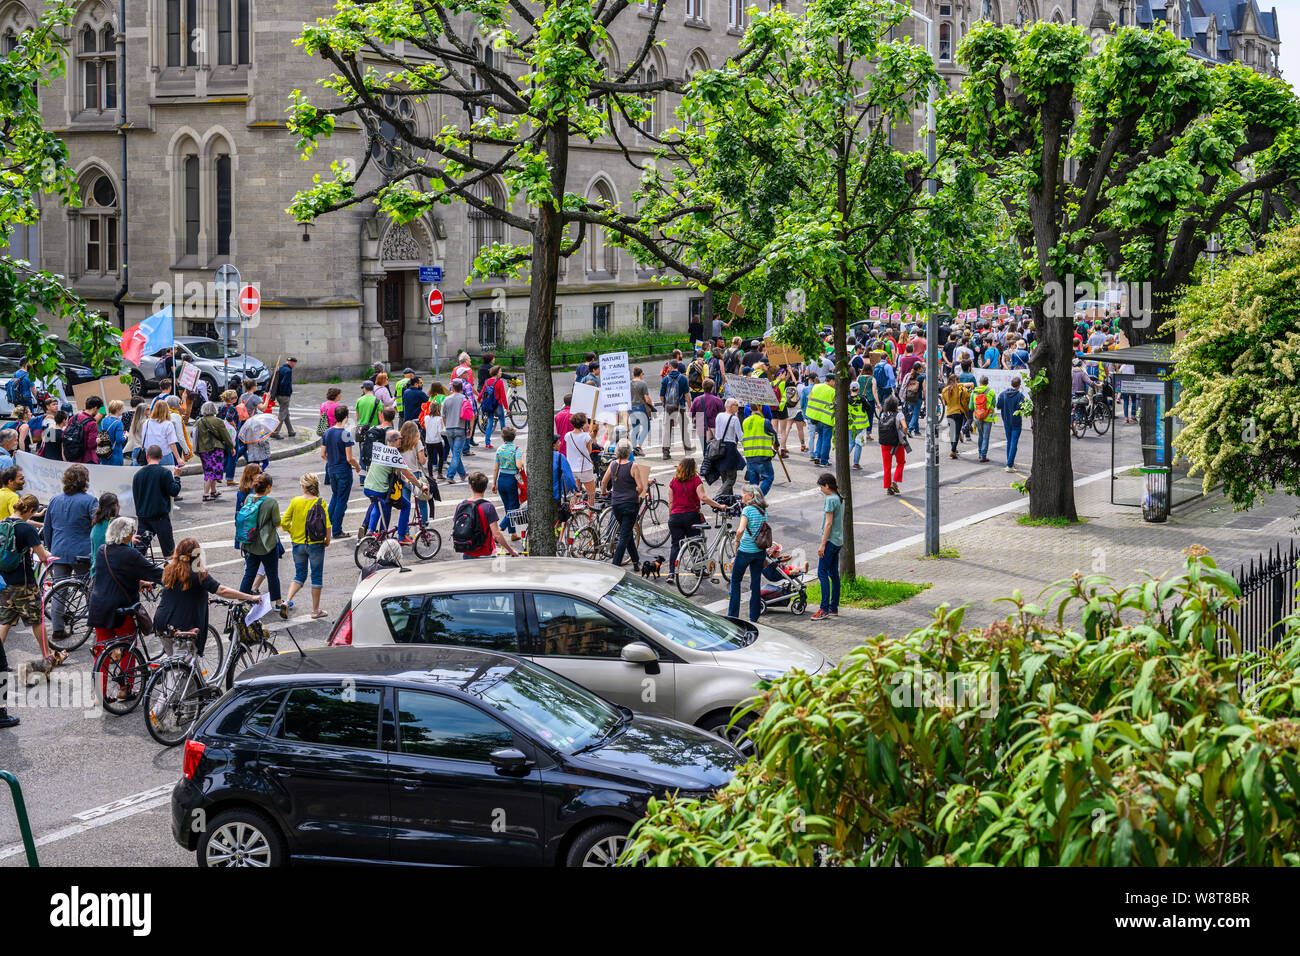 May 25, 2019, protest march against the climate global warming, Strasbourg, Alsace, France, Europe, Stock Photo